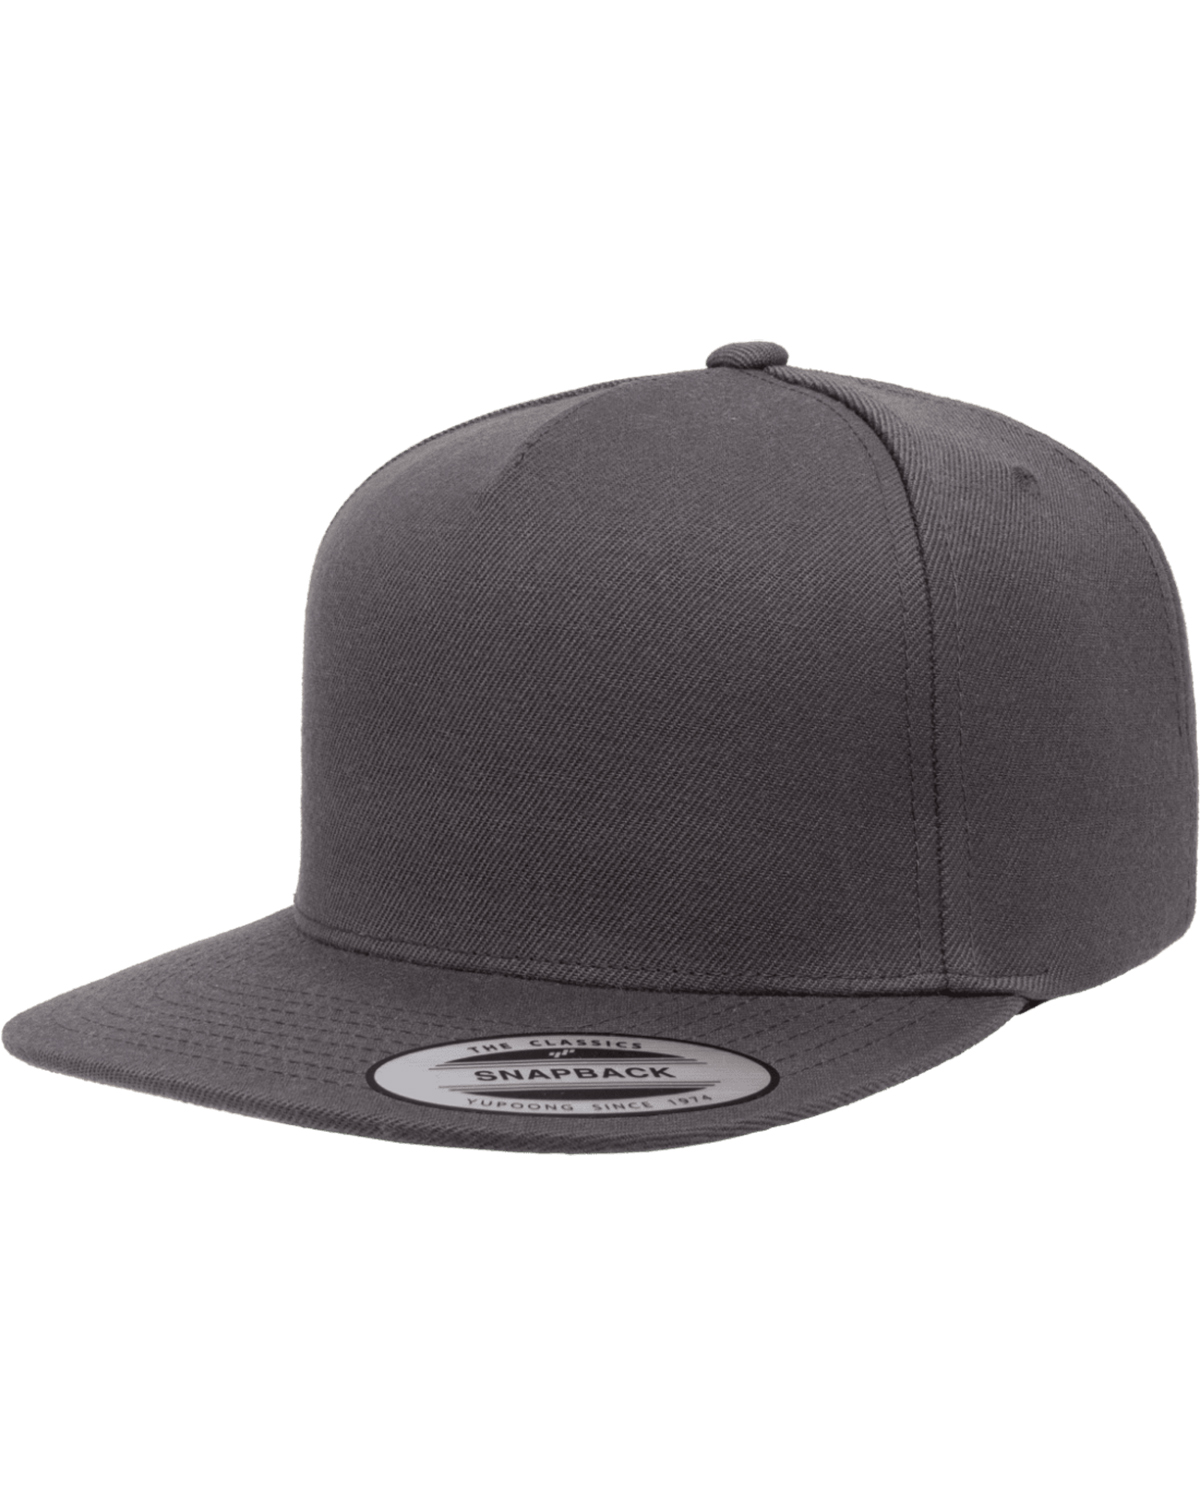 Yupoong YP5089 | Adult 5-Panel Structured Flat Visor Classic Snapback Cap |  ShirtSpace